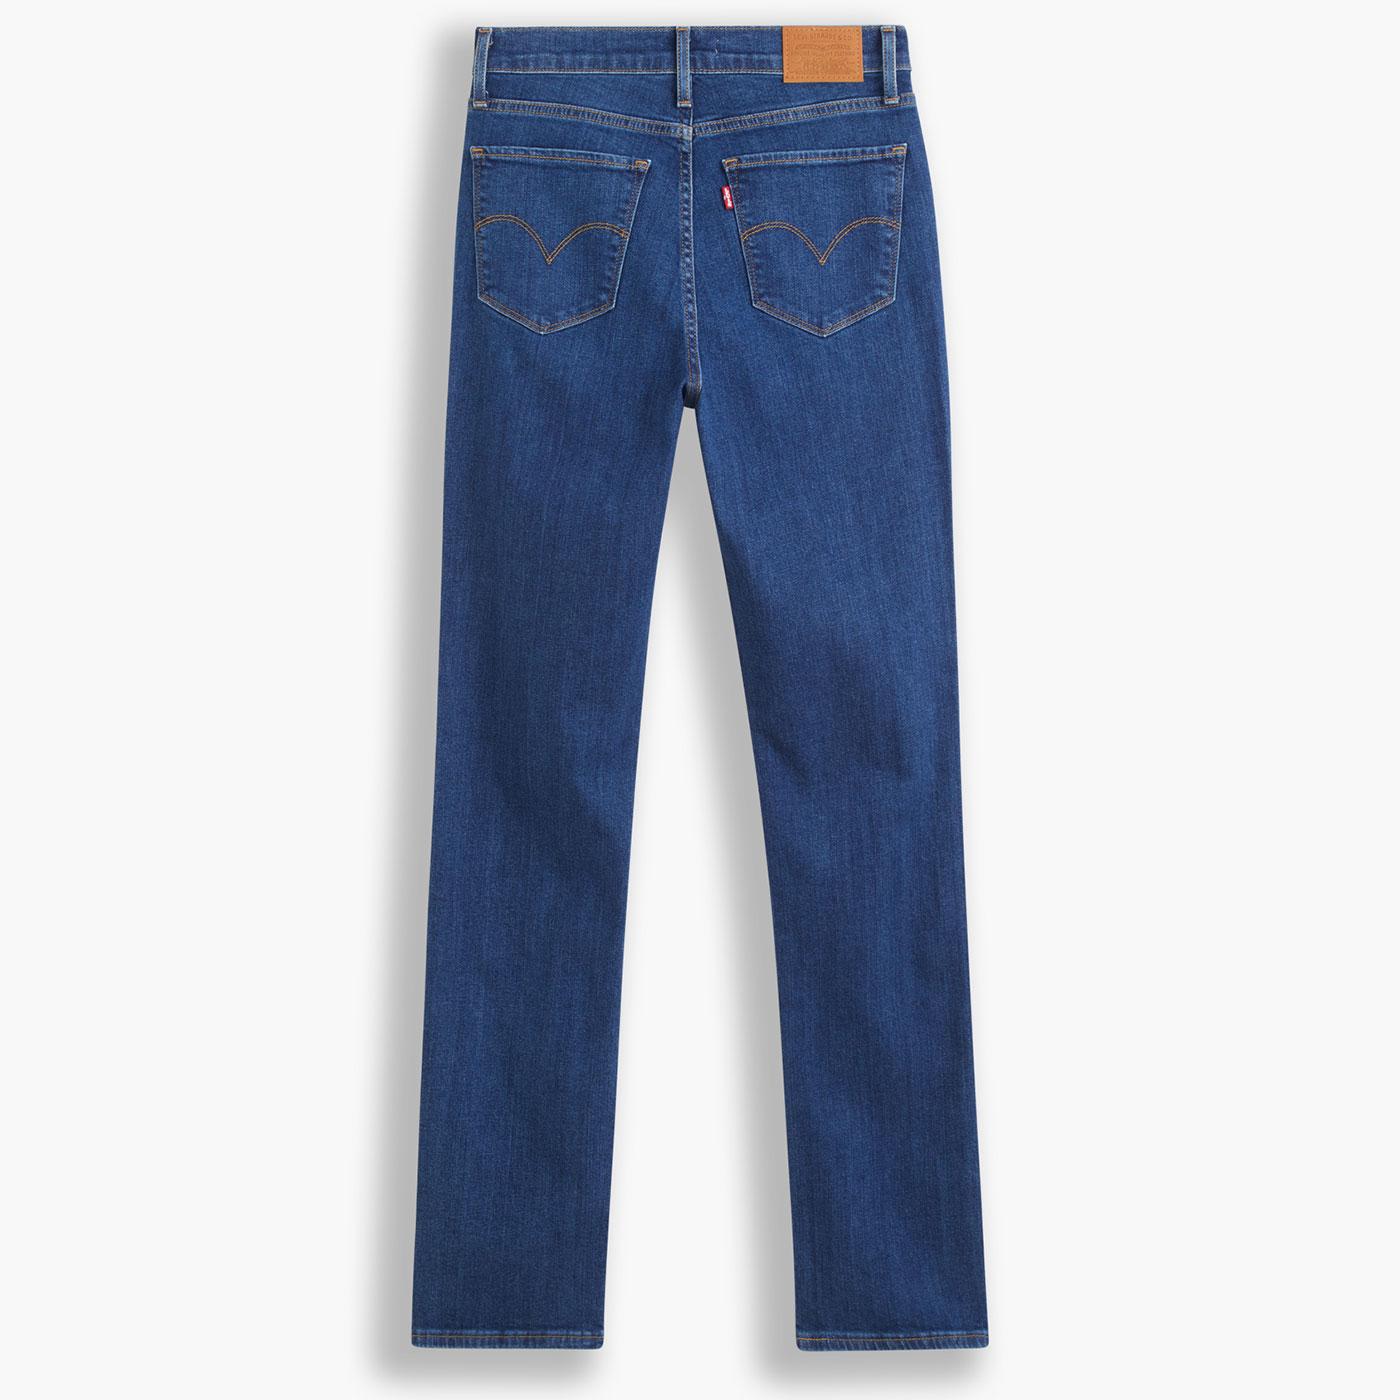 LEVI'S 724 High Rise Straight Jeans in Nonstop Indigo